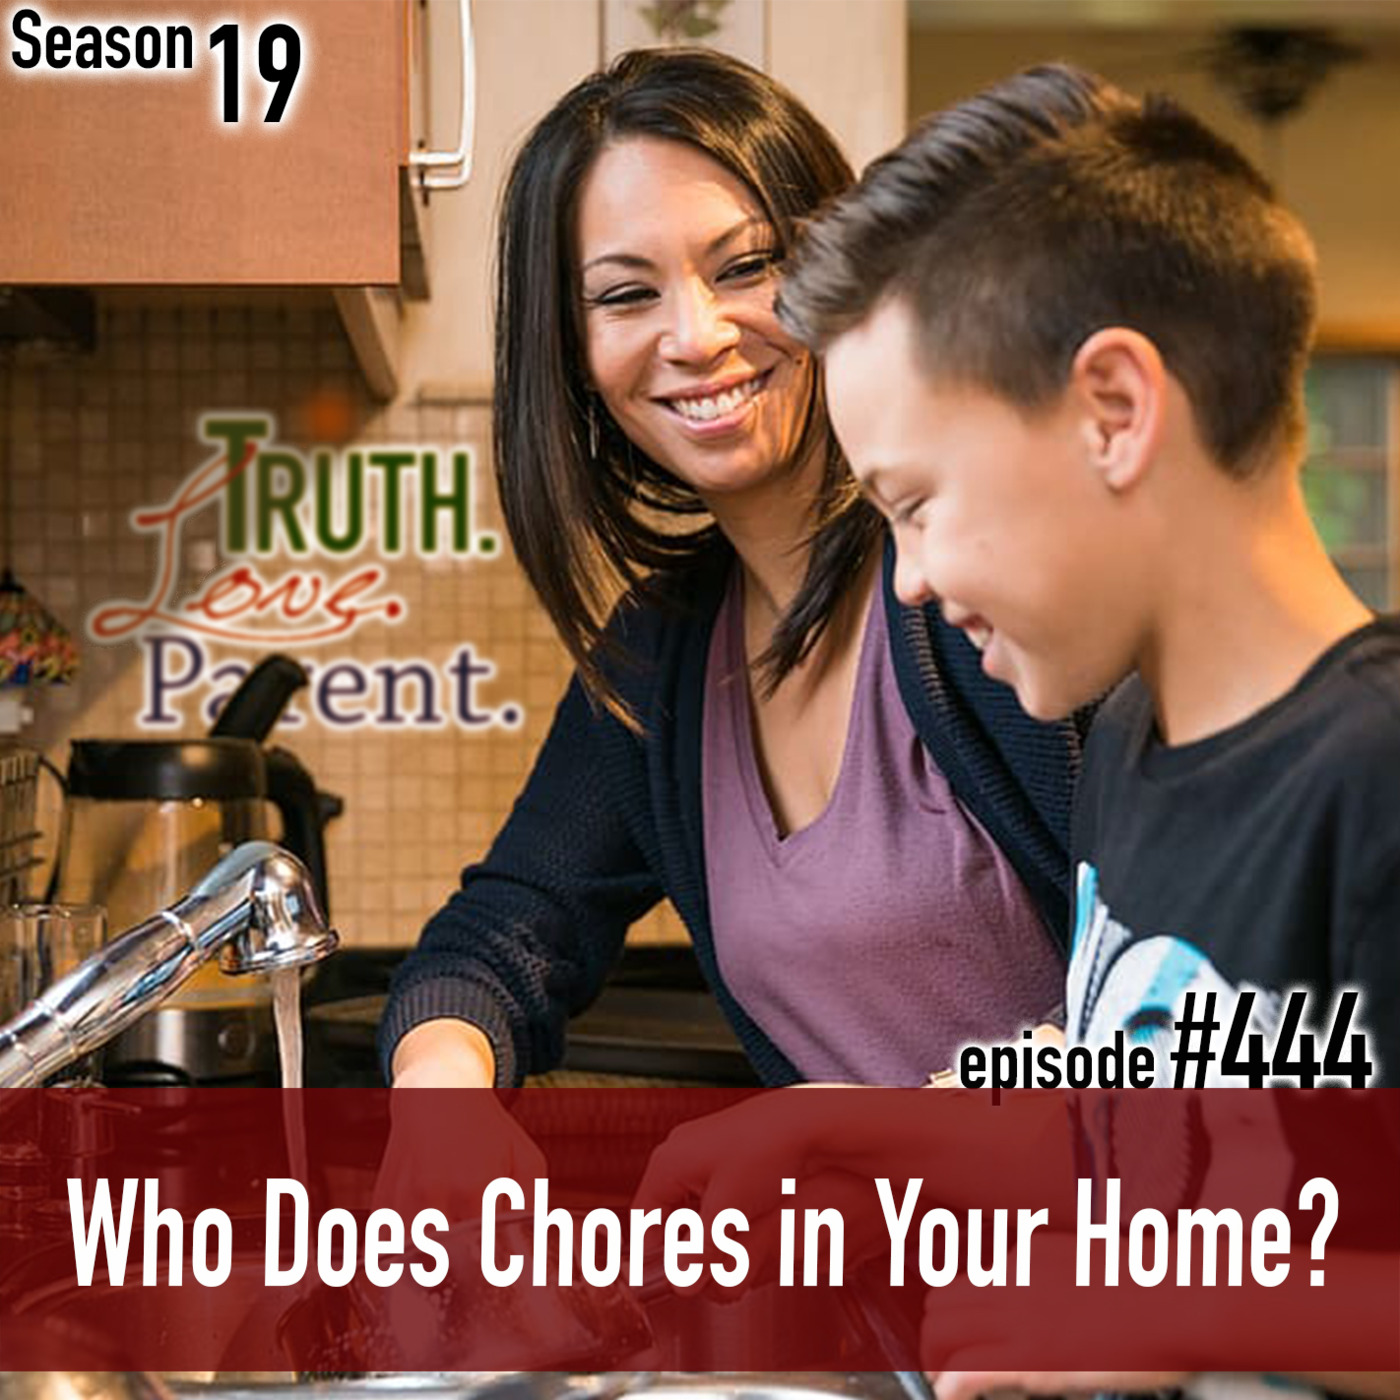 Episode 444: TLP 444: Who Does Chores in Your Home?